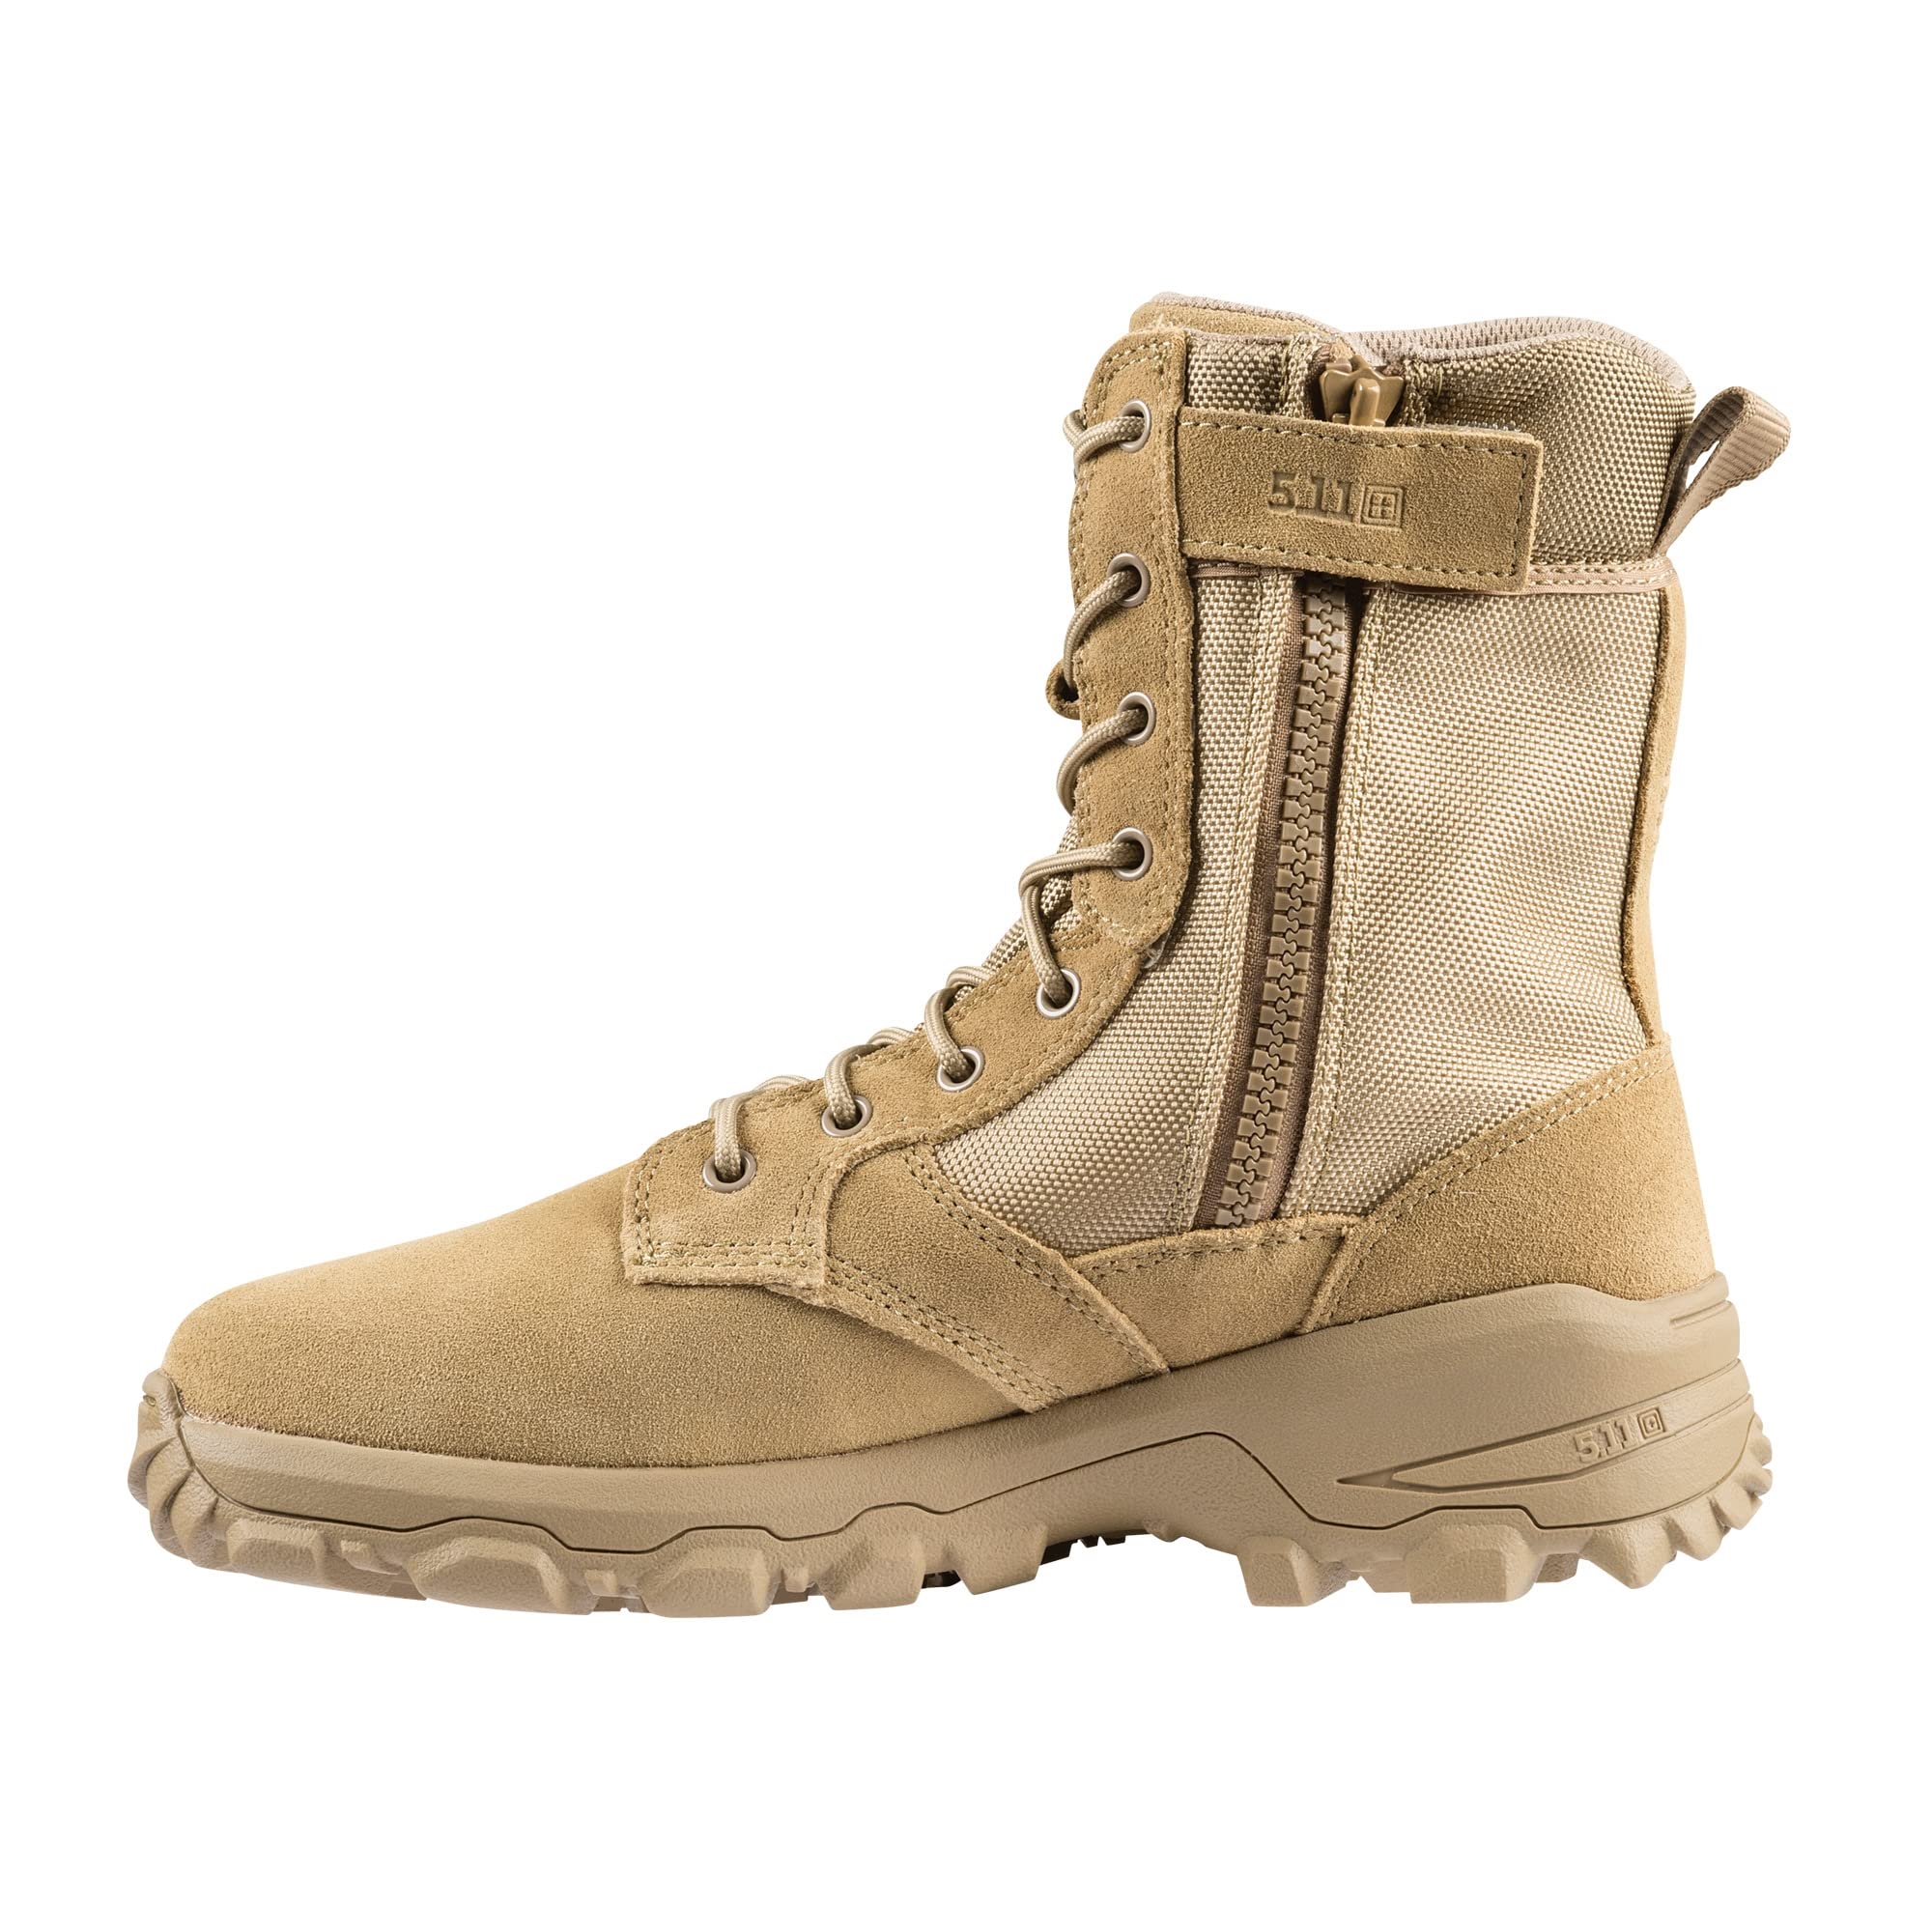 5.11 Tactical Men's Leather Speed 3.0 Side Zip Combat Military Desert Boots, Style 12336/12337